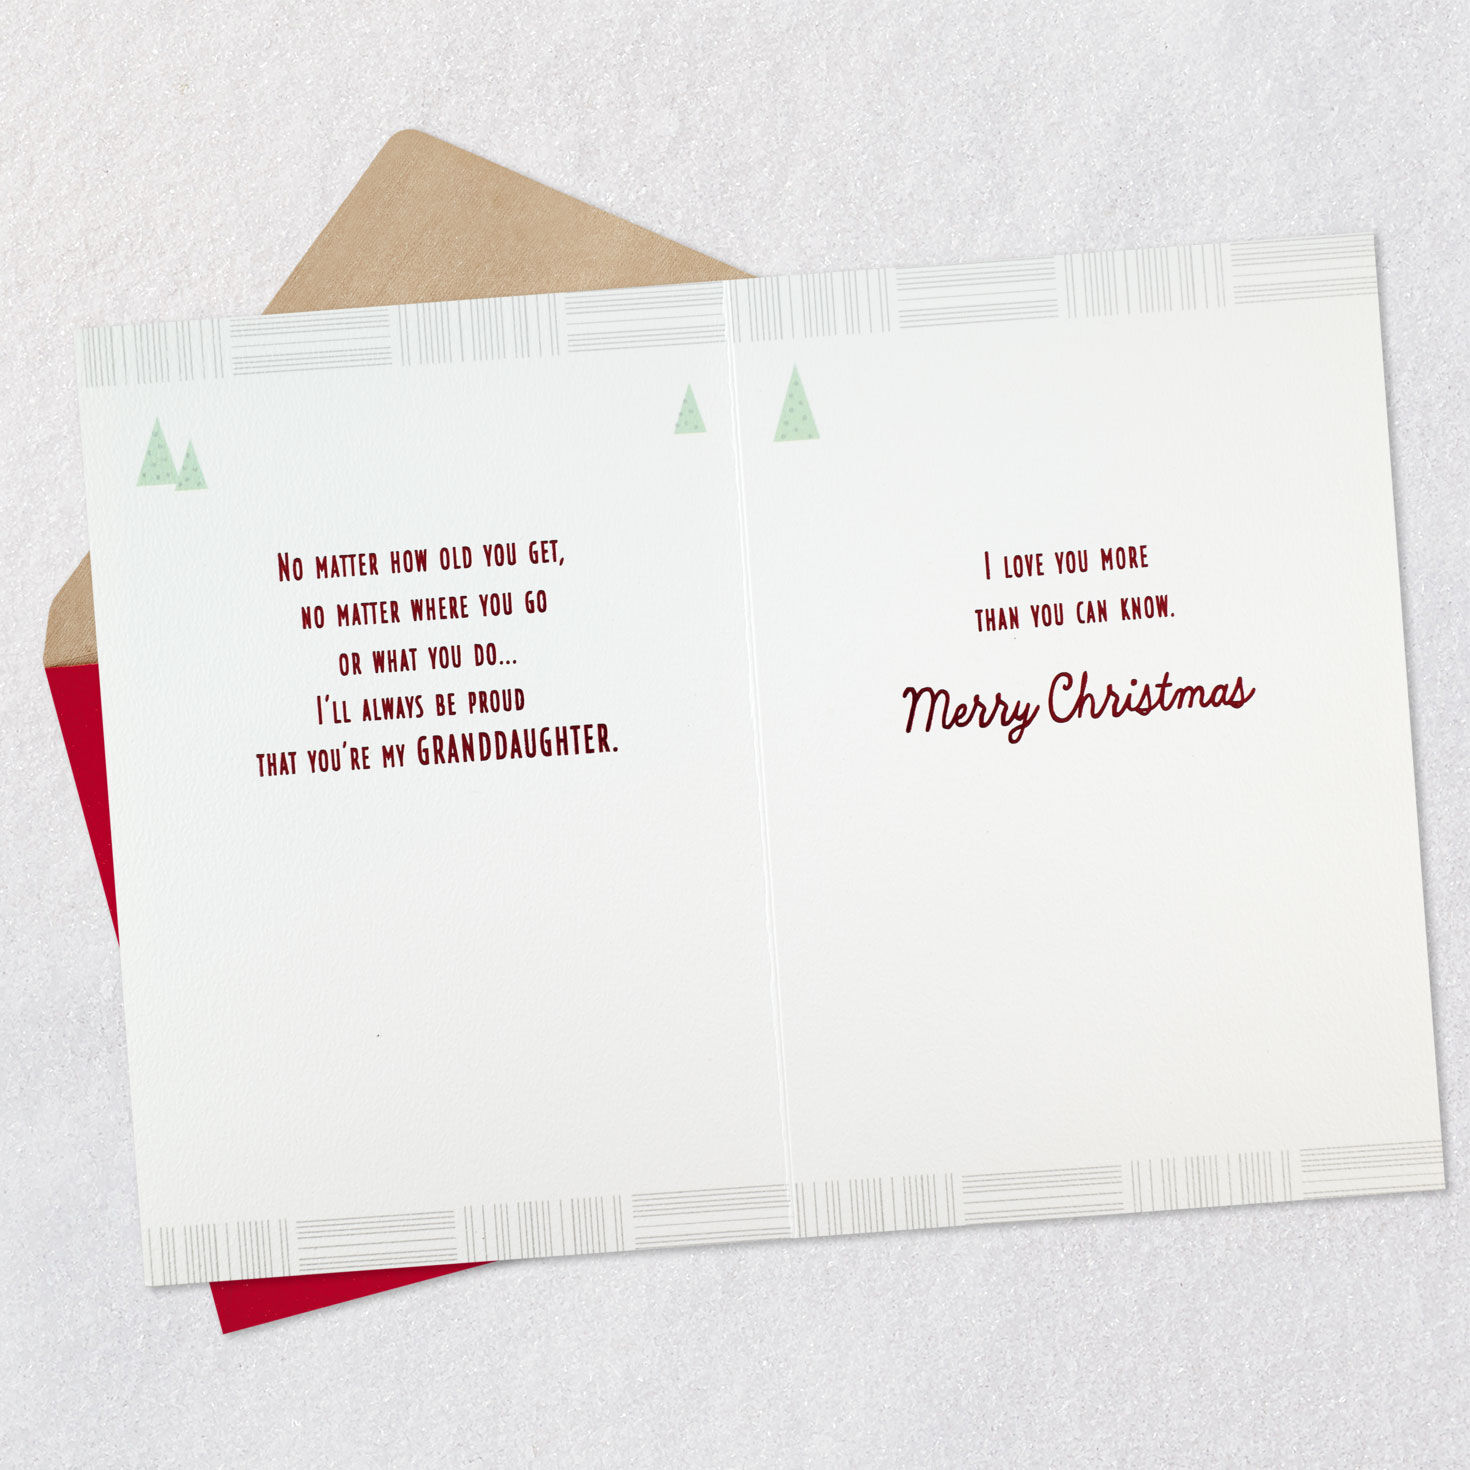 So Loved, So Proud Christmas Card for Granddaughter for only USD 5.99 | Hallmark